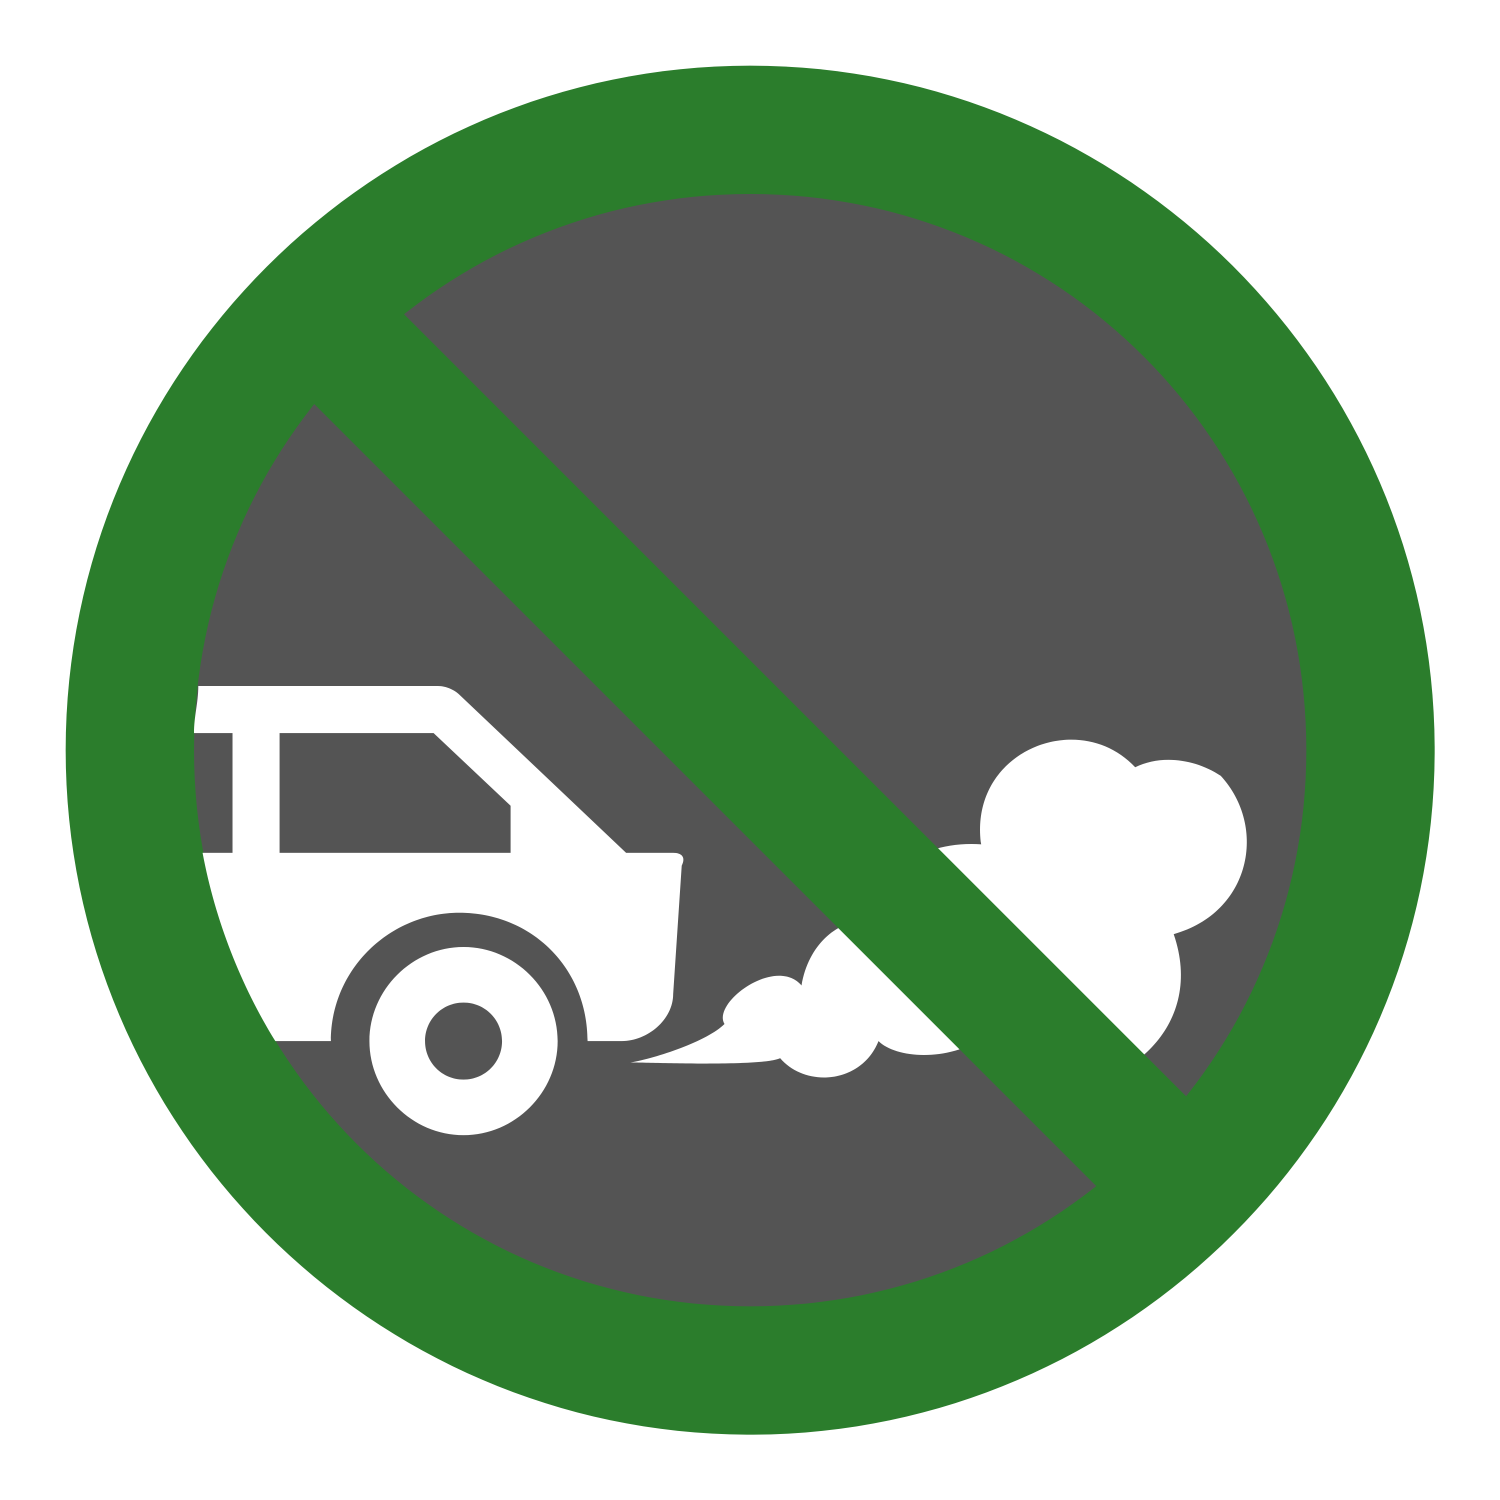 Idling Car with Green Cross indicating no idling